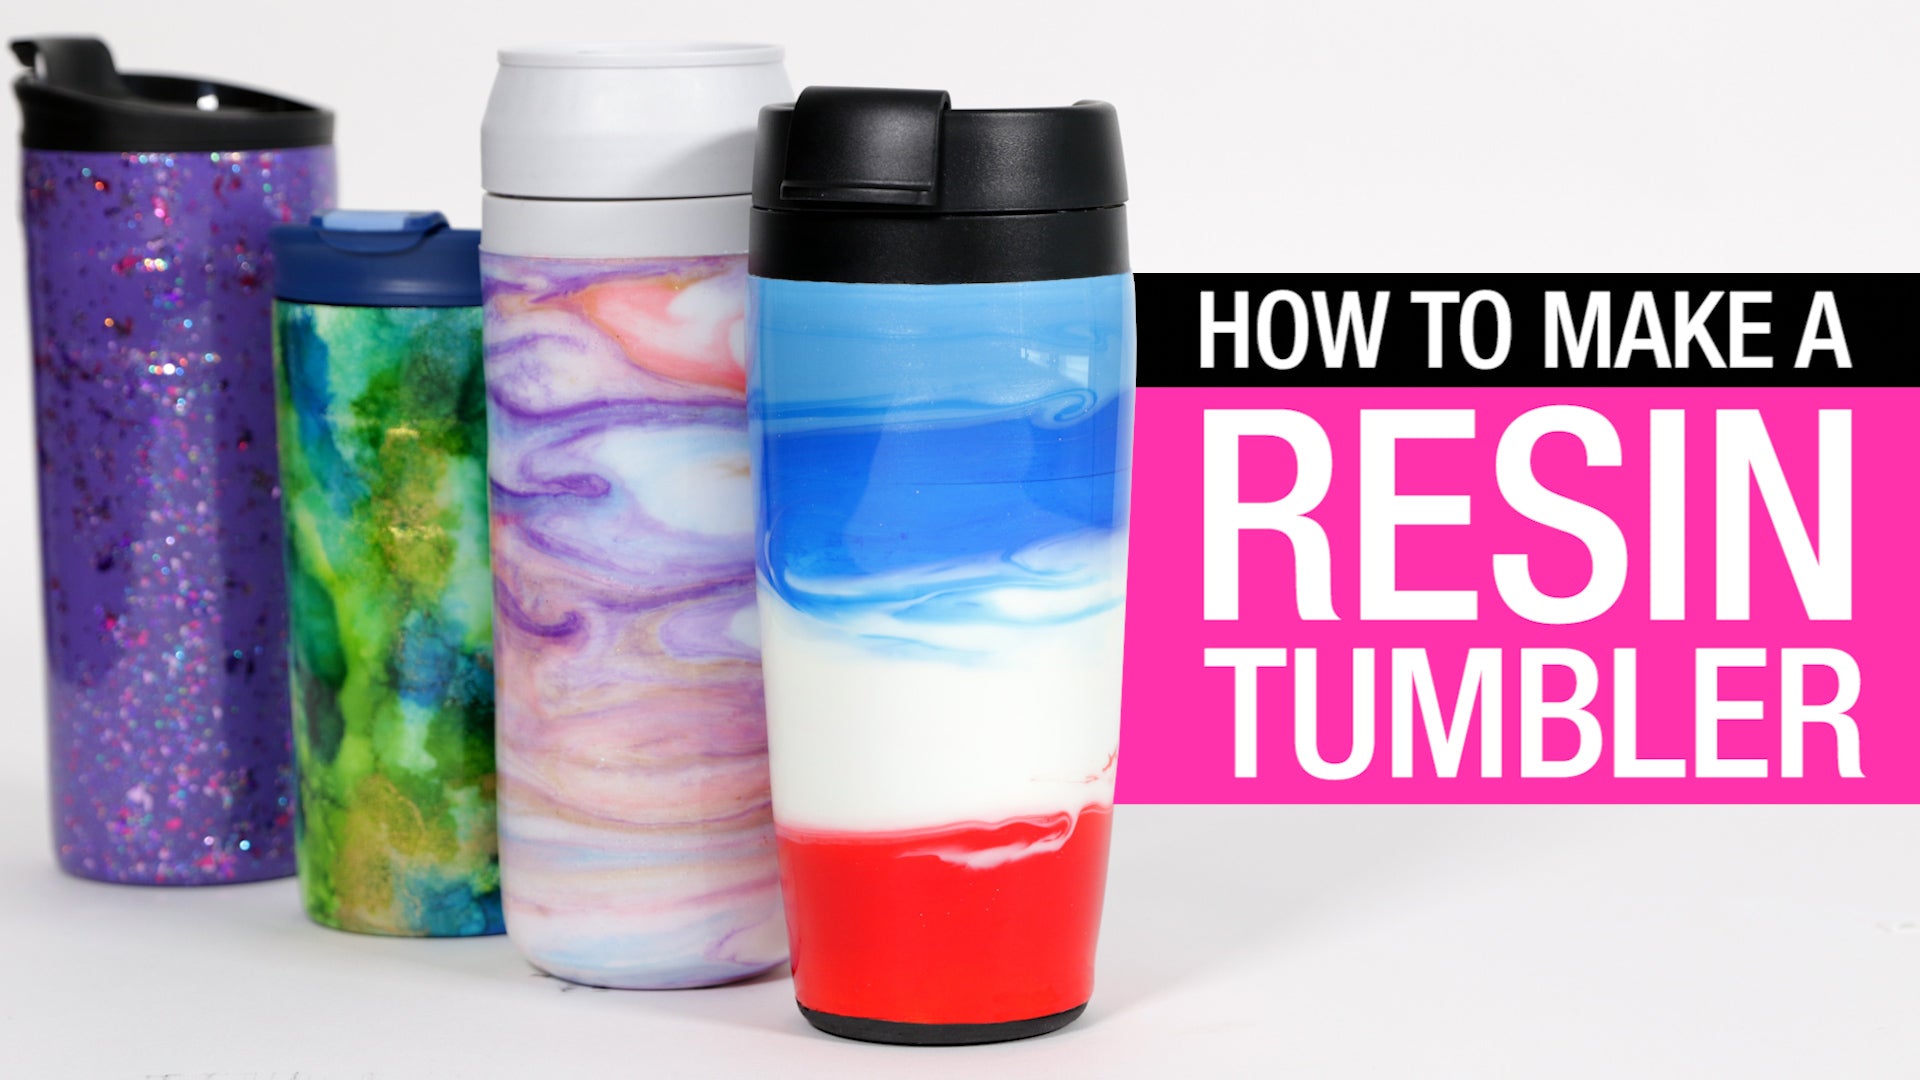  Tumbler Turner Kit with Epoxy Resin for Tumblers, Cup